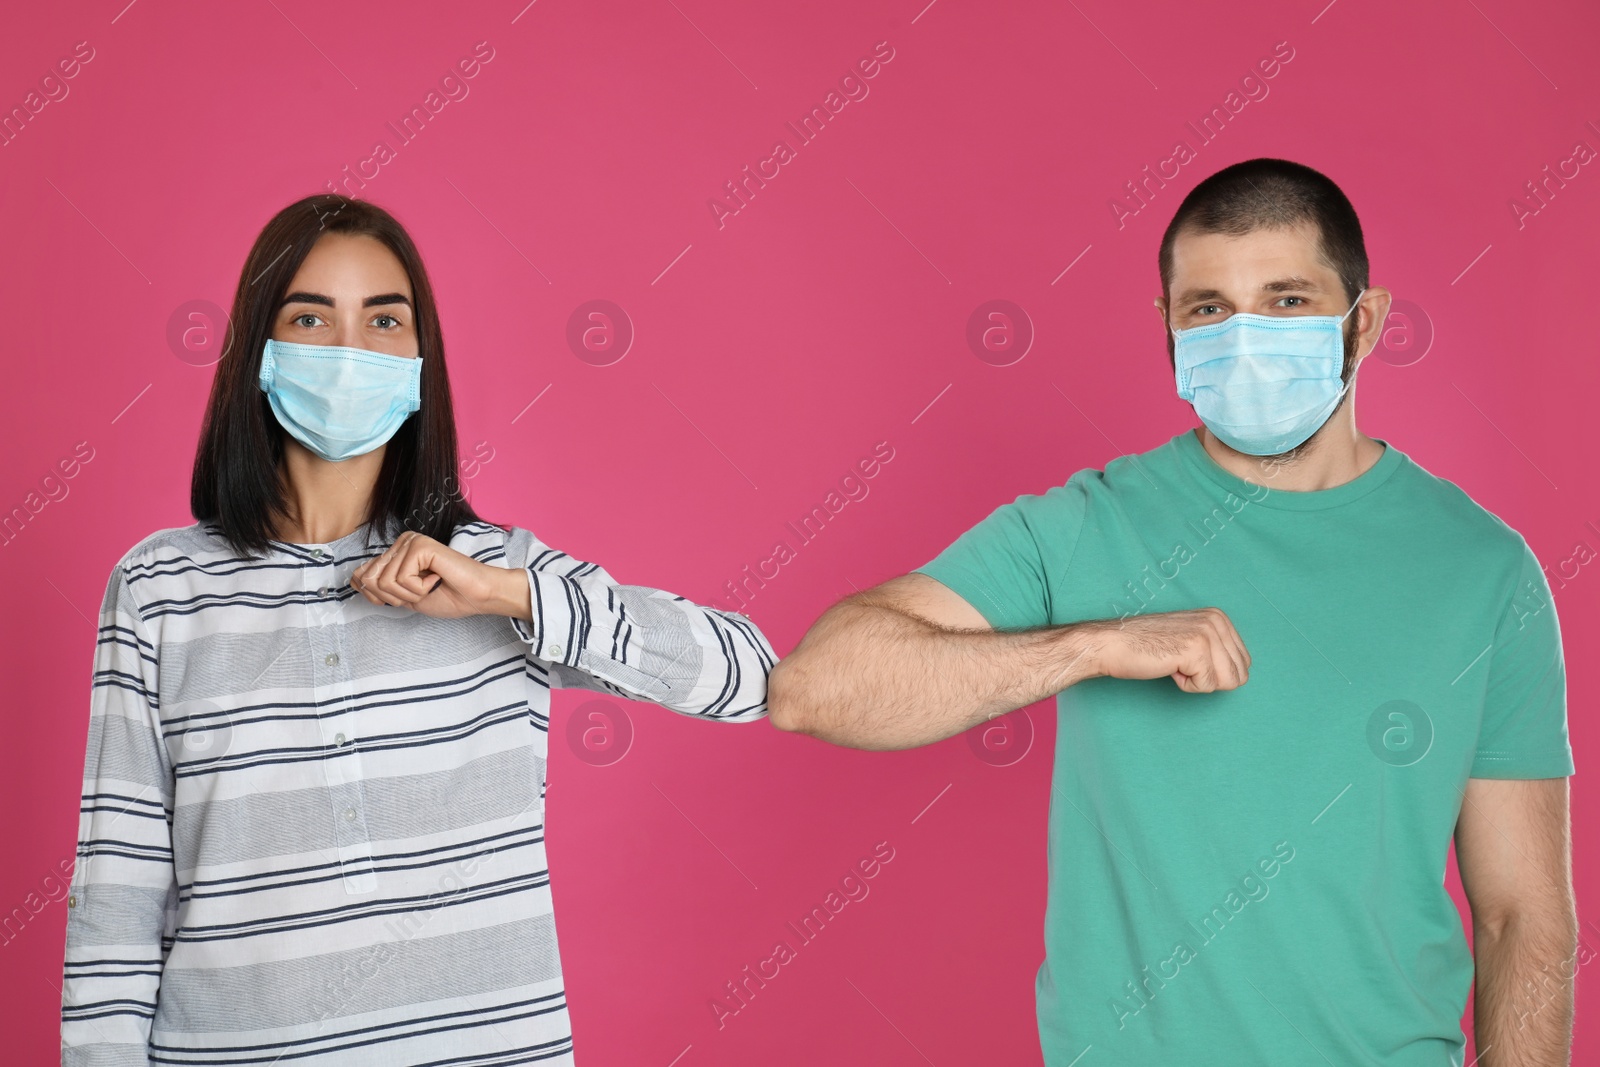 Photo of Man and woman bumping elbows to say hello on pink background. Keeping social distance during coronavirus pandemic